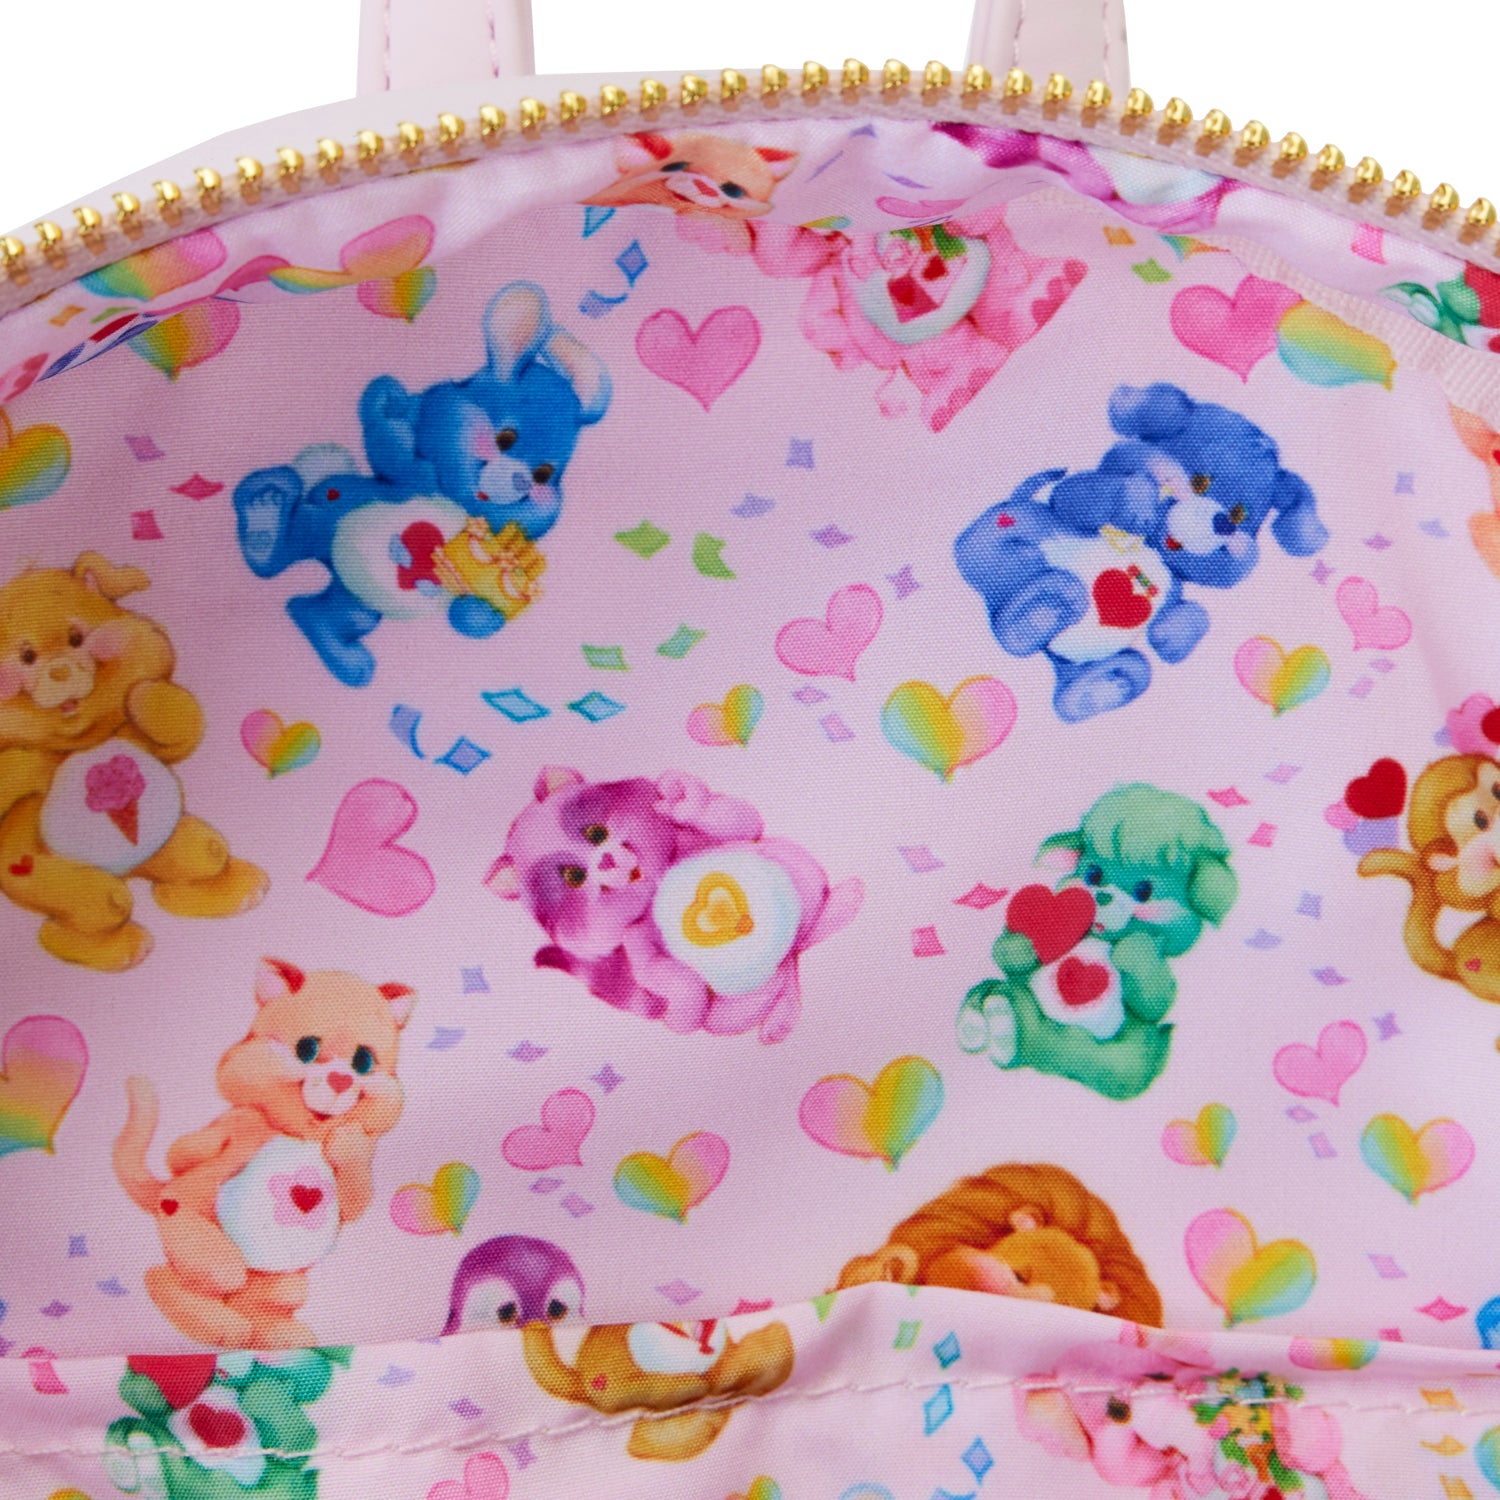 Loungefly x Care Bears Cousins Cloud Crew Mini Backpack